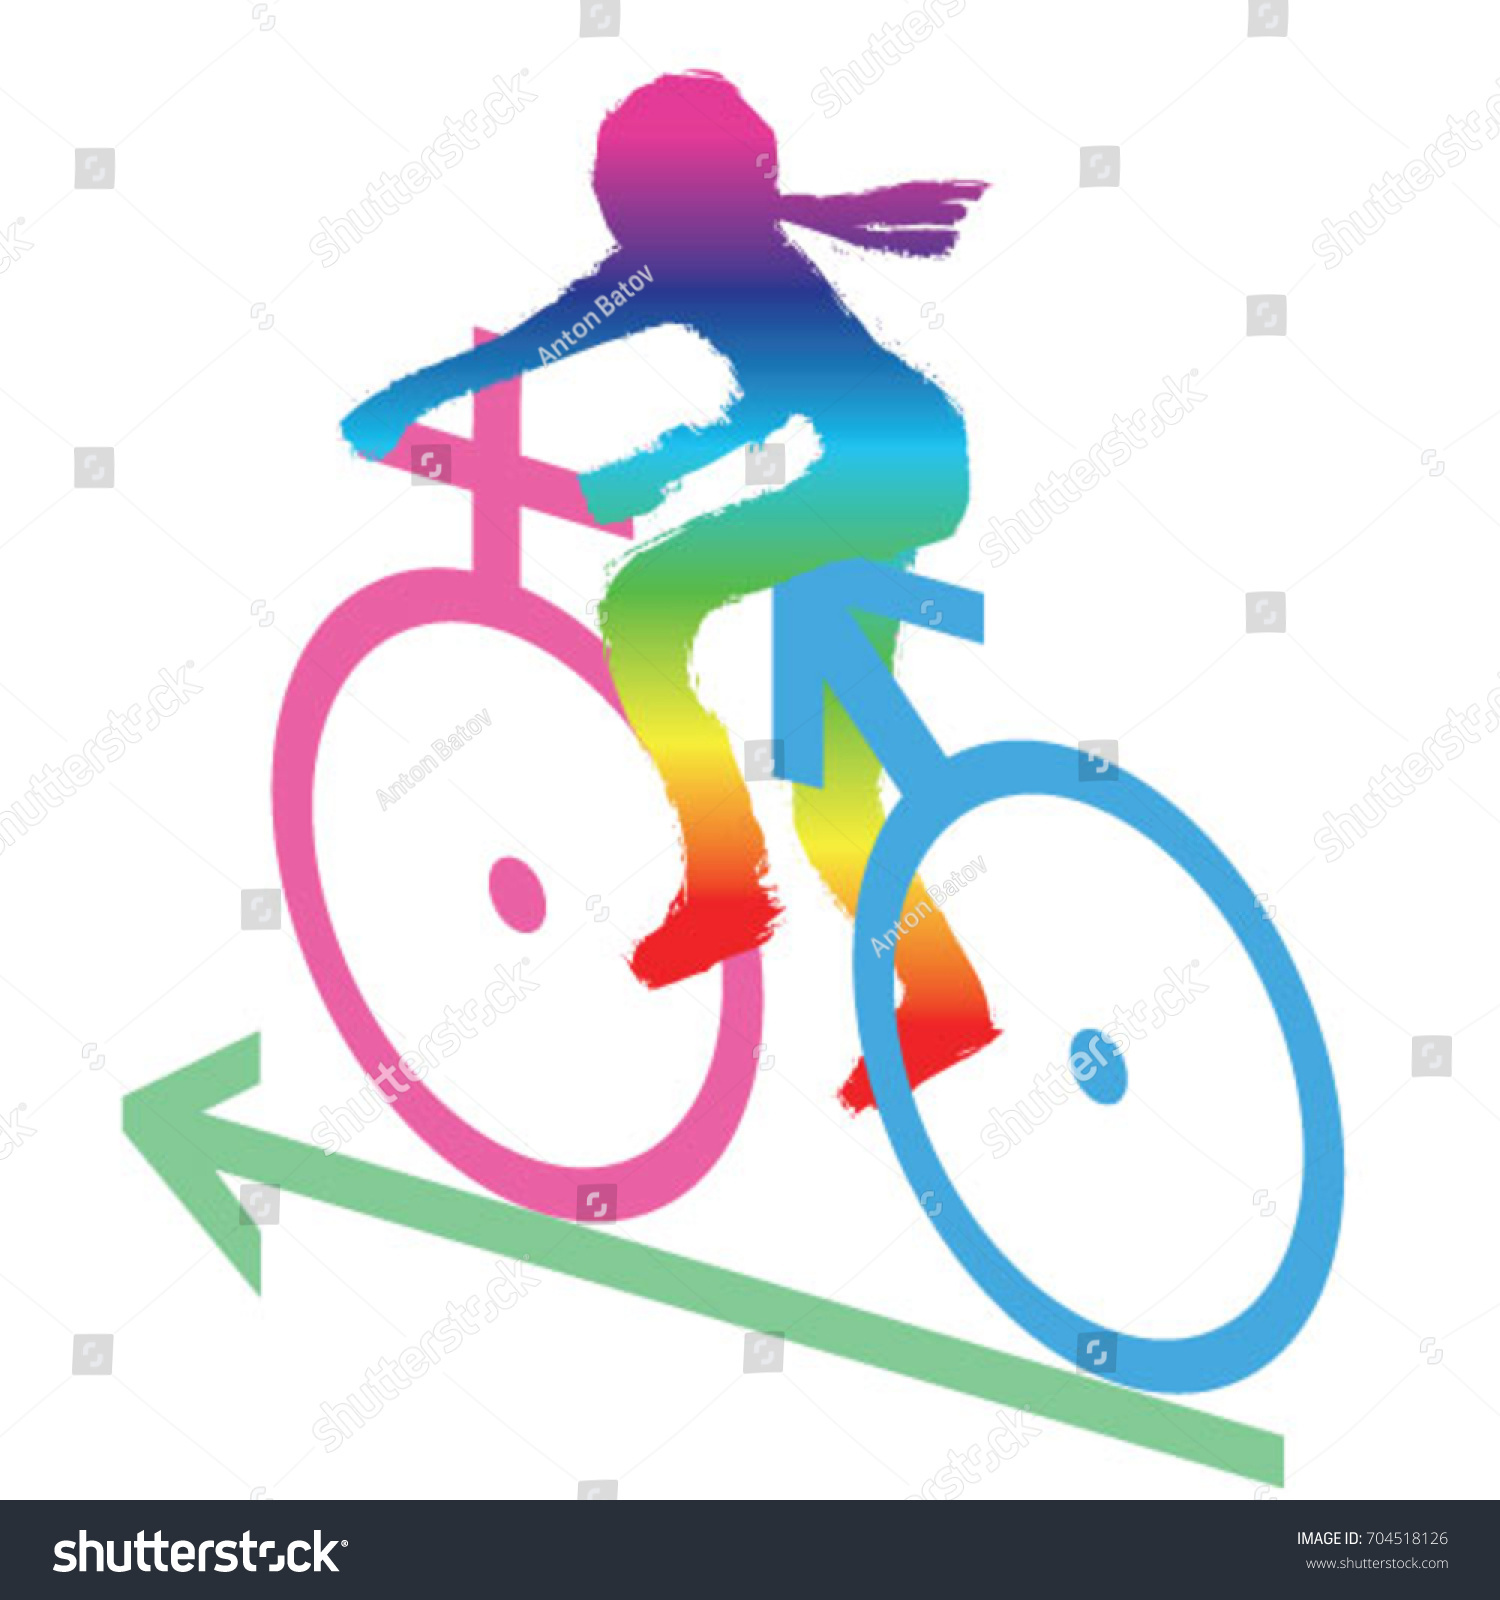 Symbols Male Female Sex Form Bicycle Stock Vector Royalty Free 704518126 3999